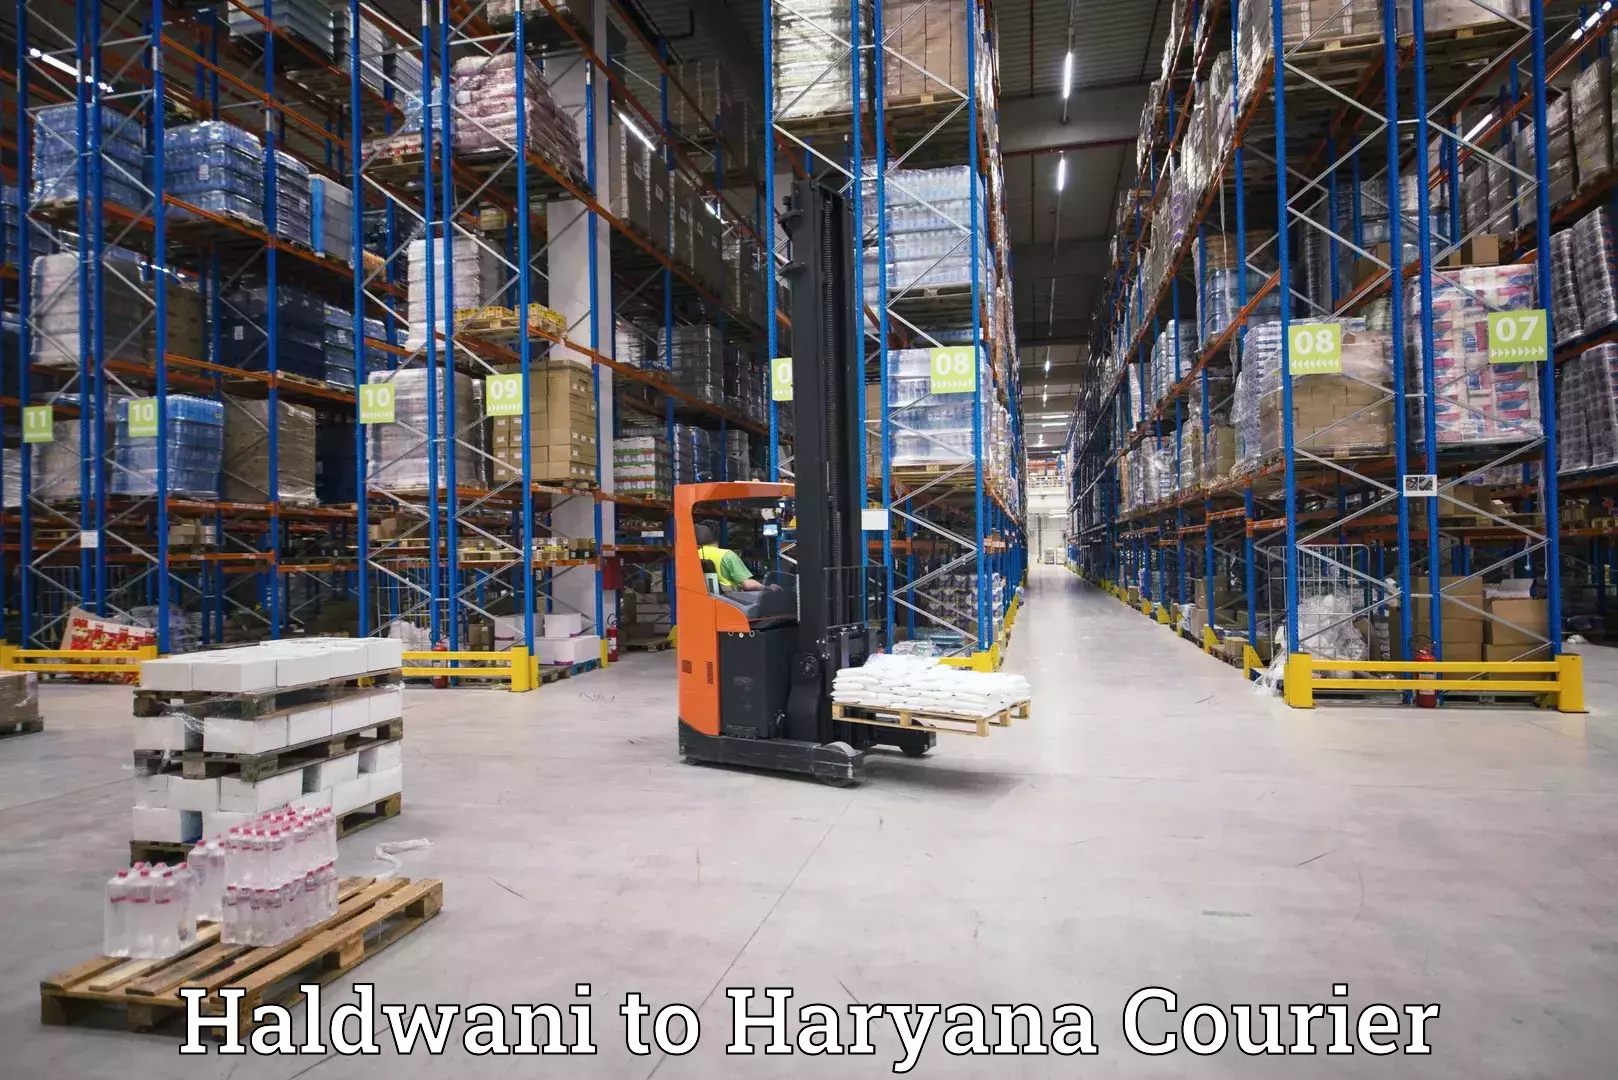 Express delivery capabilities in Haldwani to Haryana